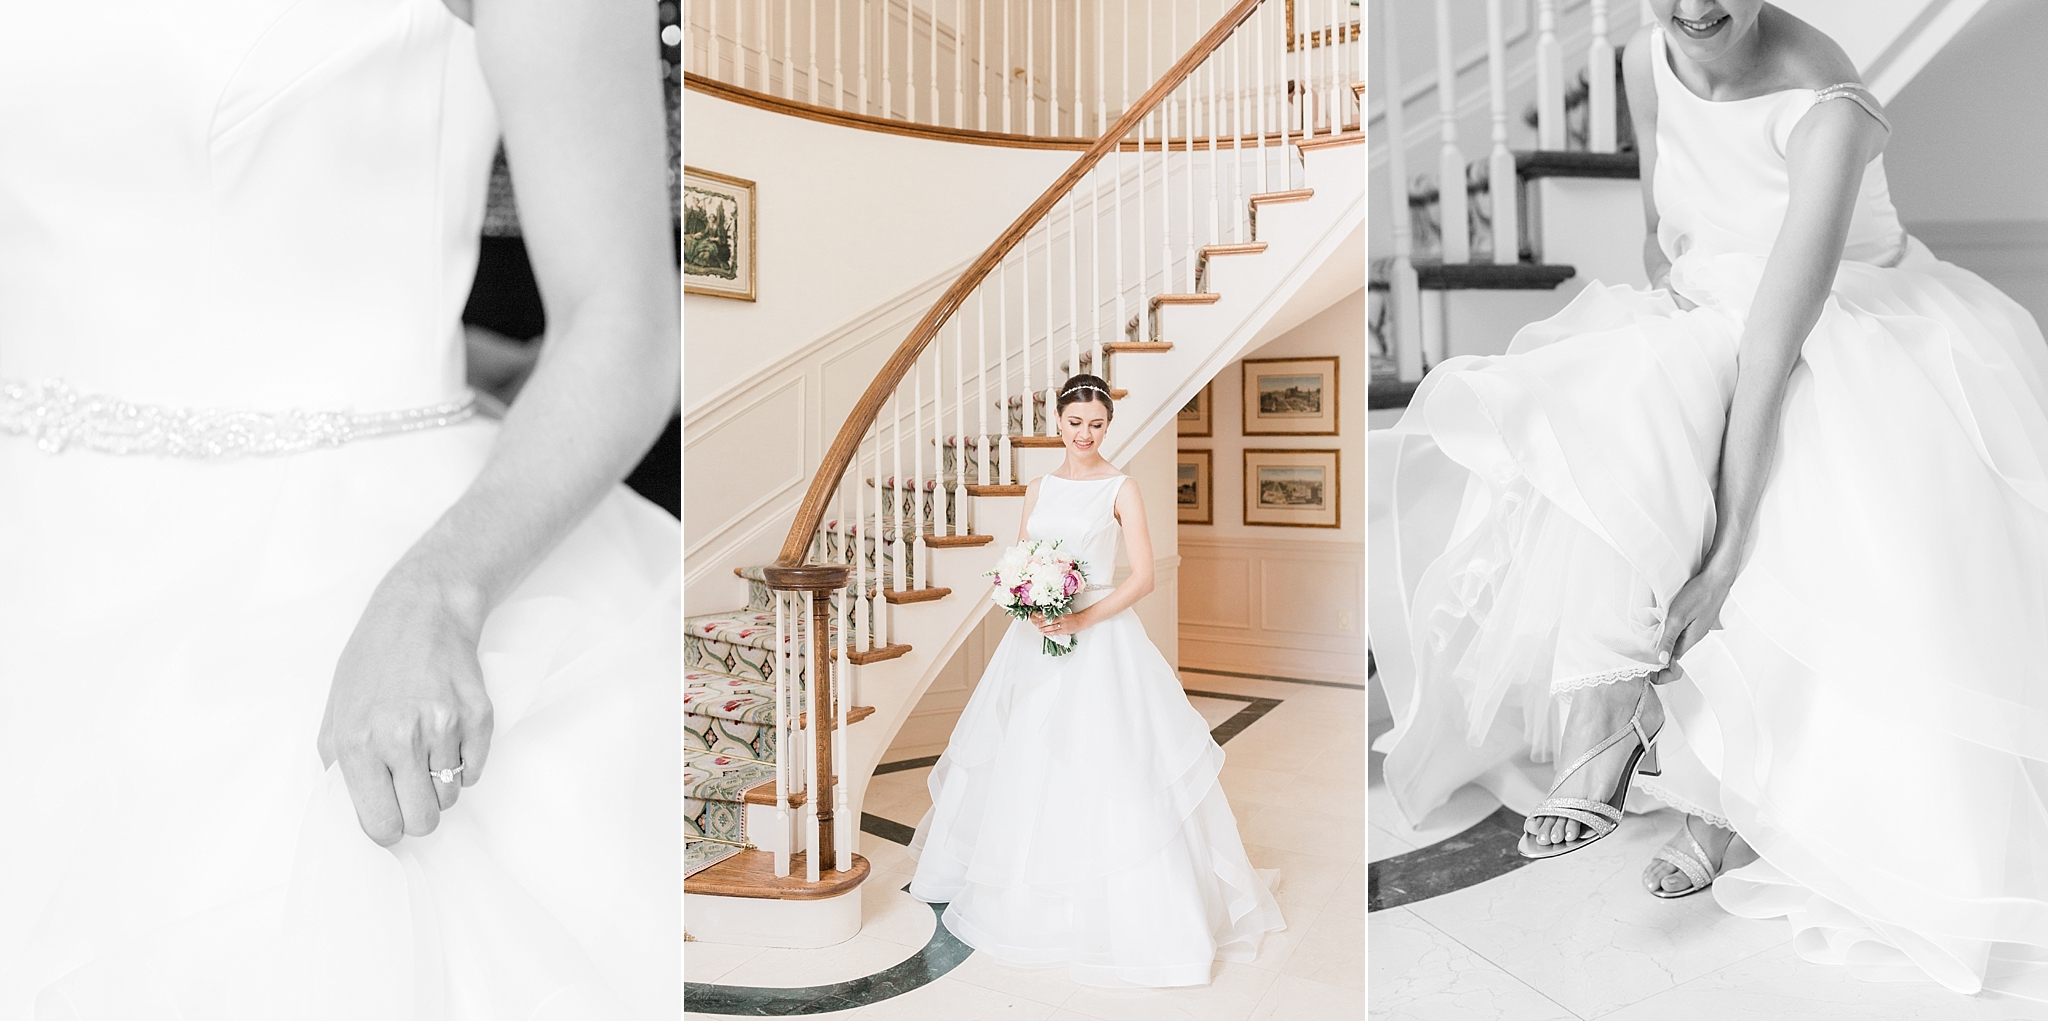 This elegant Whitby Castle wedding features a summery color palette with regal undertones. The entire day was photographed by DC wedding photographer, Alicia Lacey.